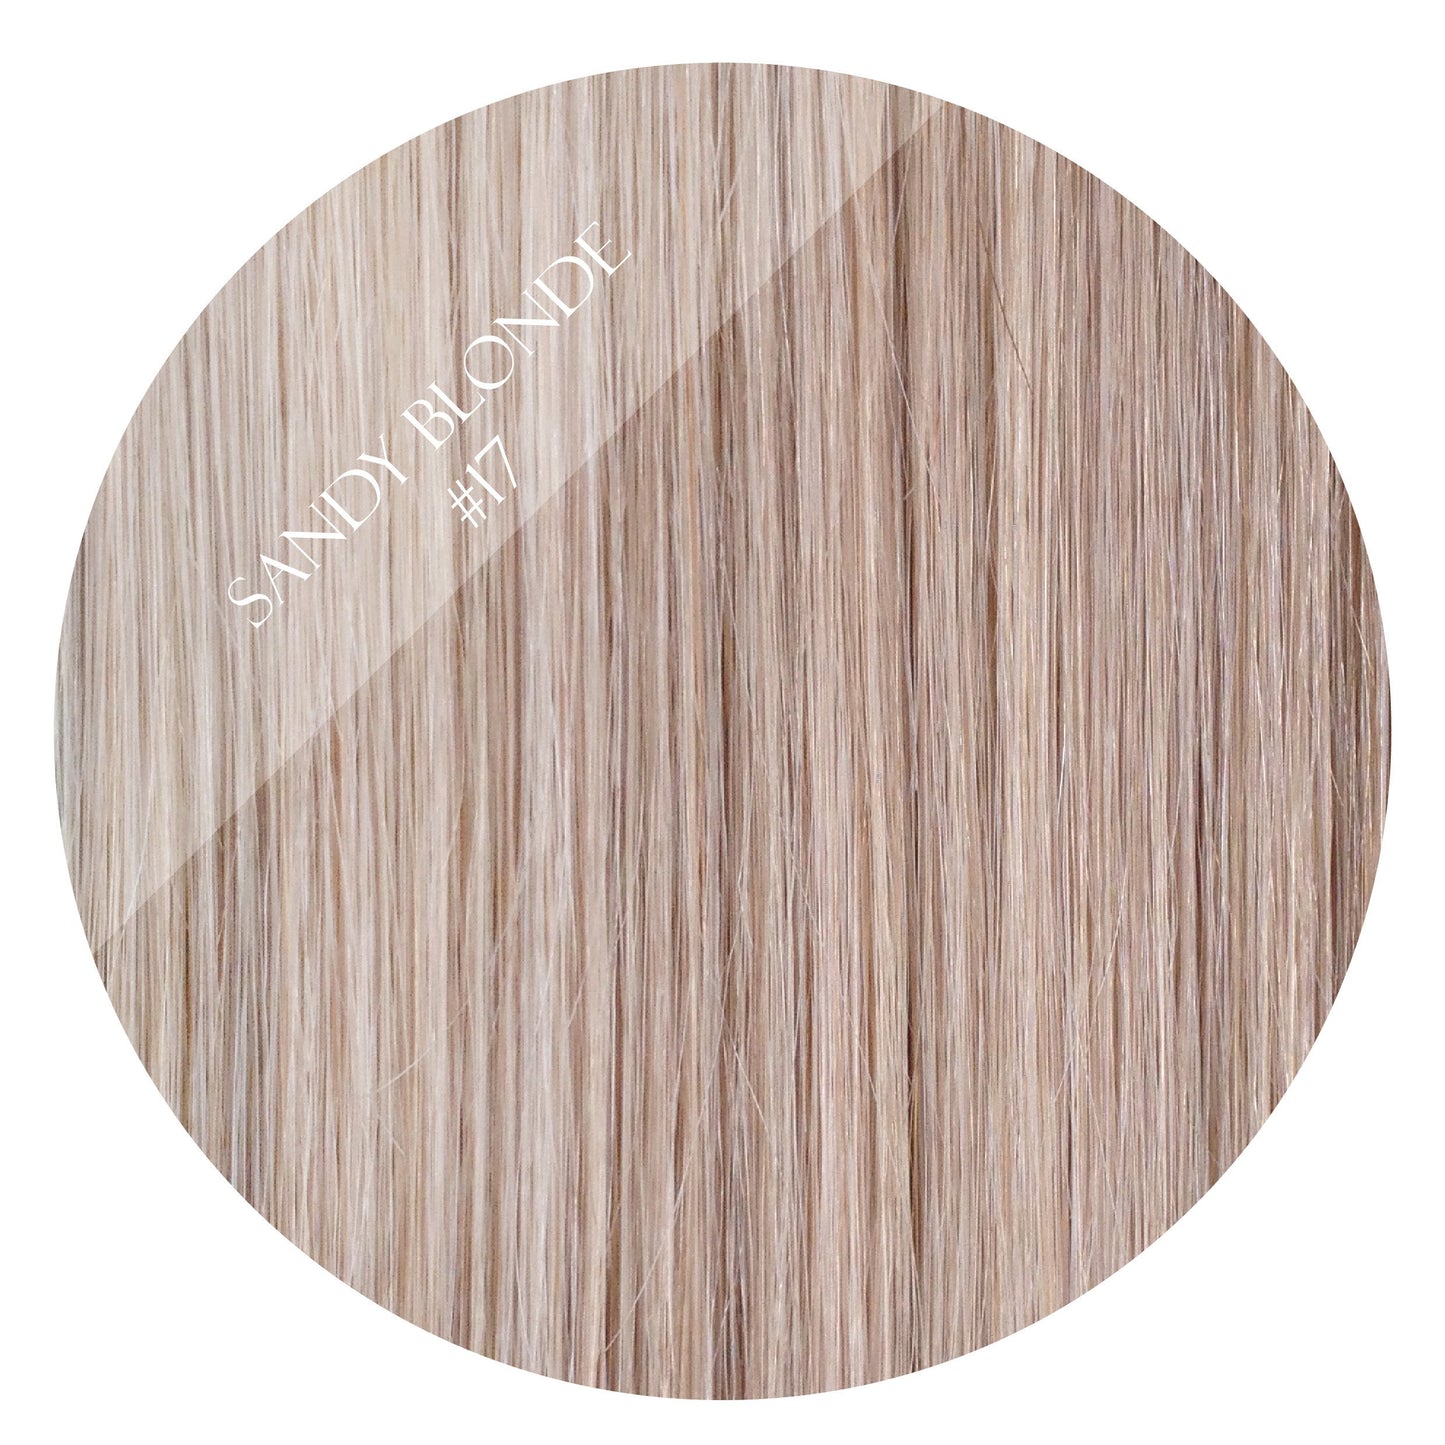 latte blonde #17 clip on ponytail hair extensions 26inch deluxe 26inch